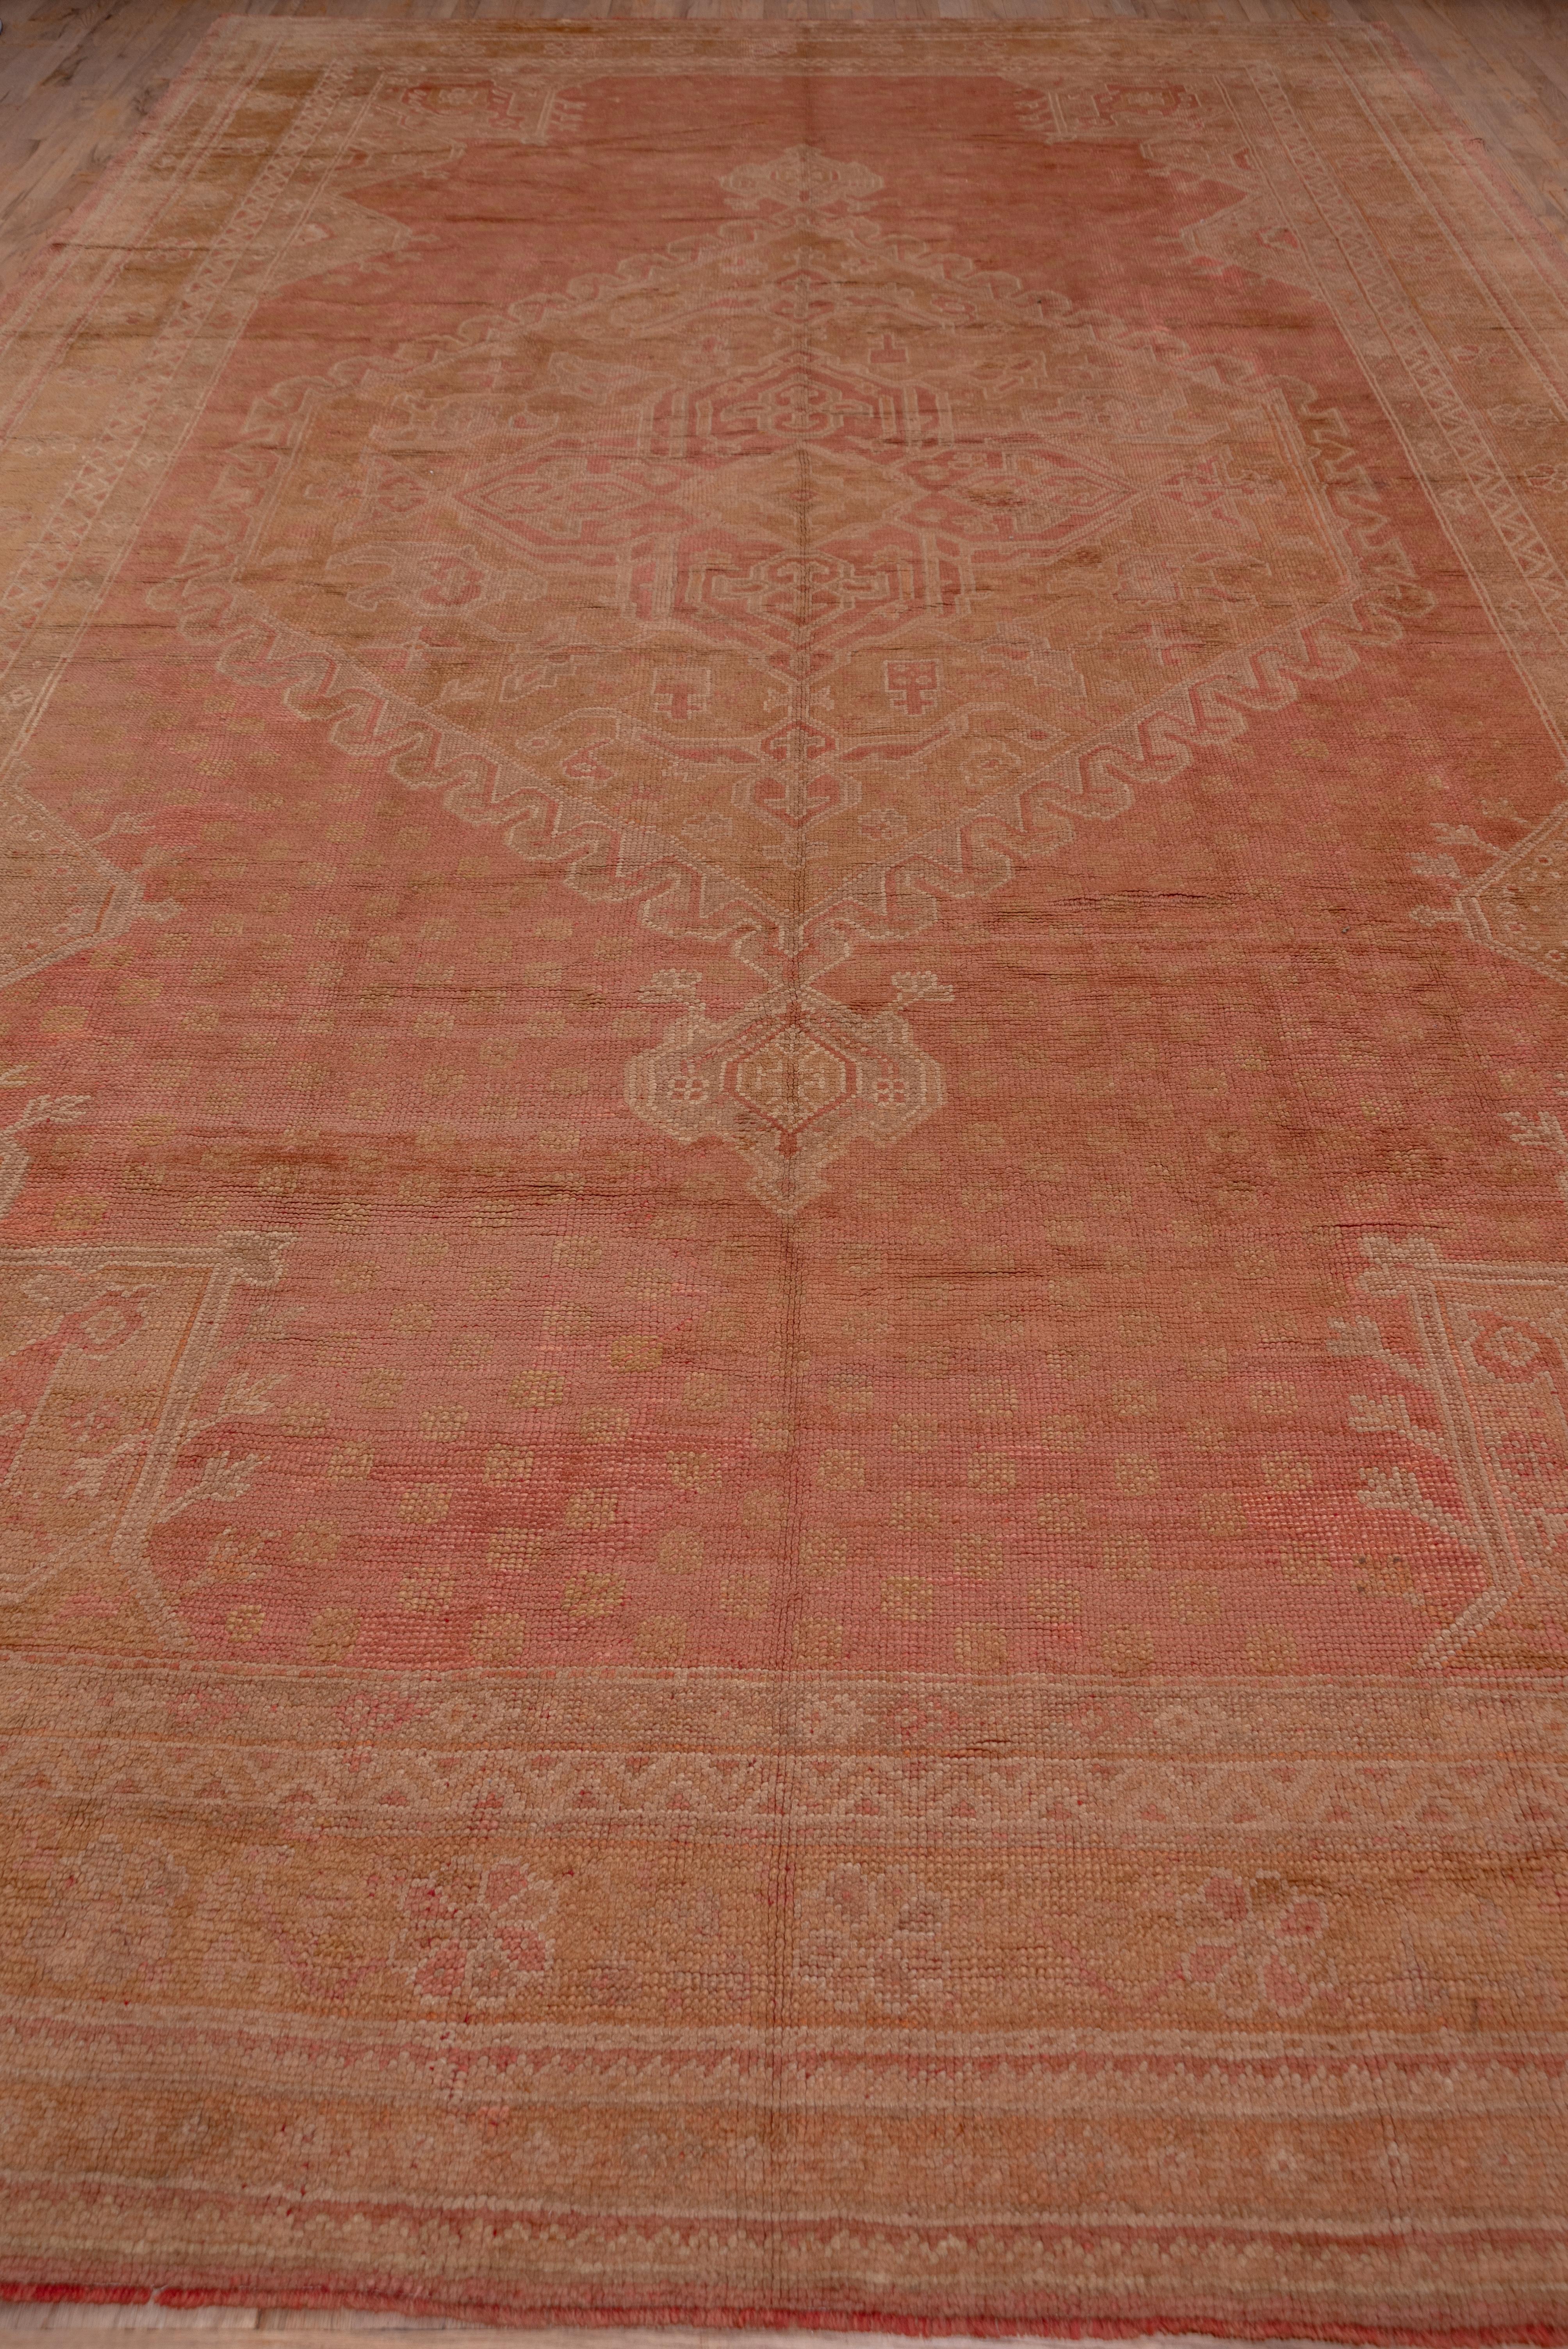 Orange Antique Turkish Oushak Carpet In Excellent Condition For Sale In New York, NY